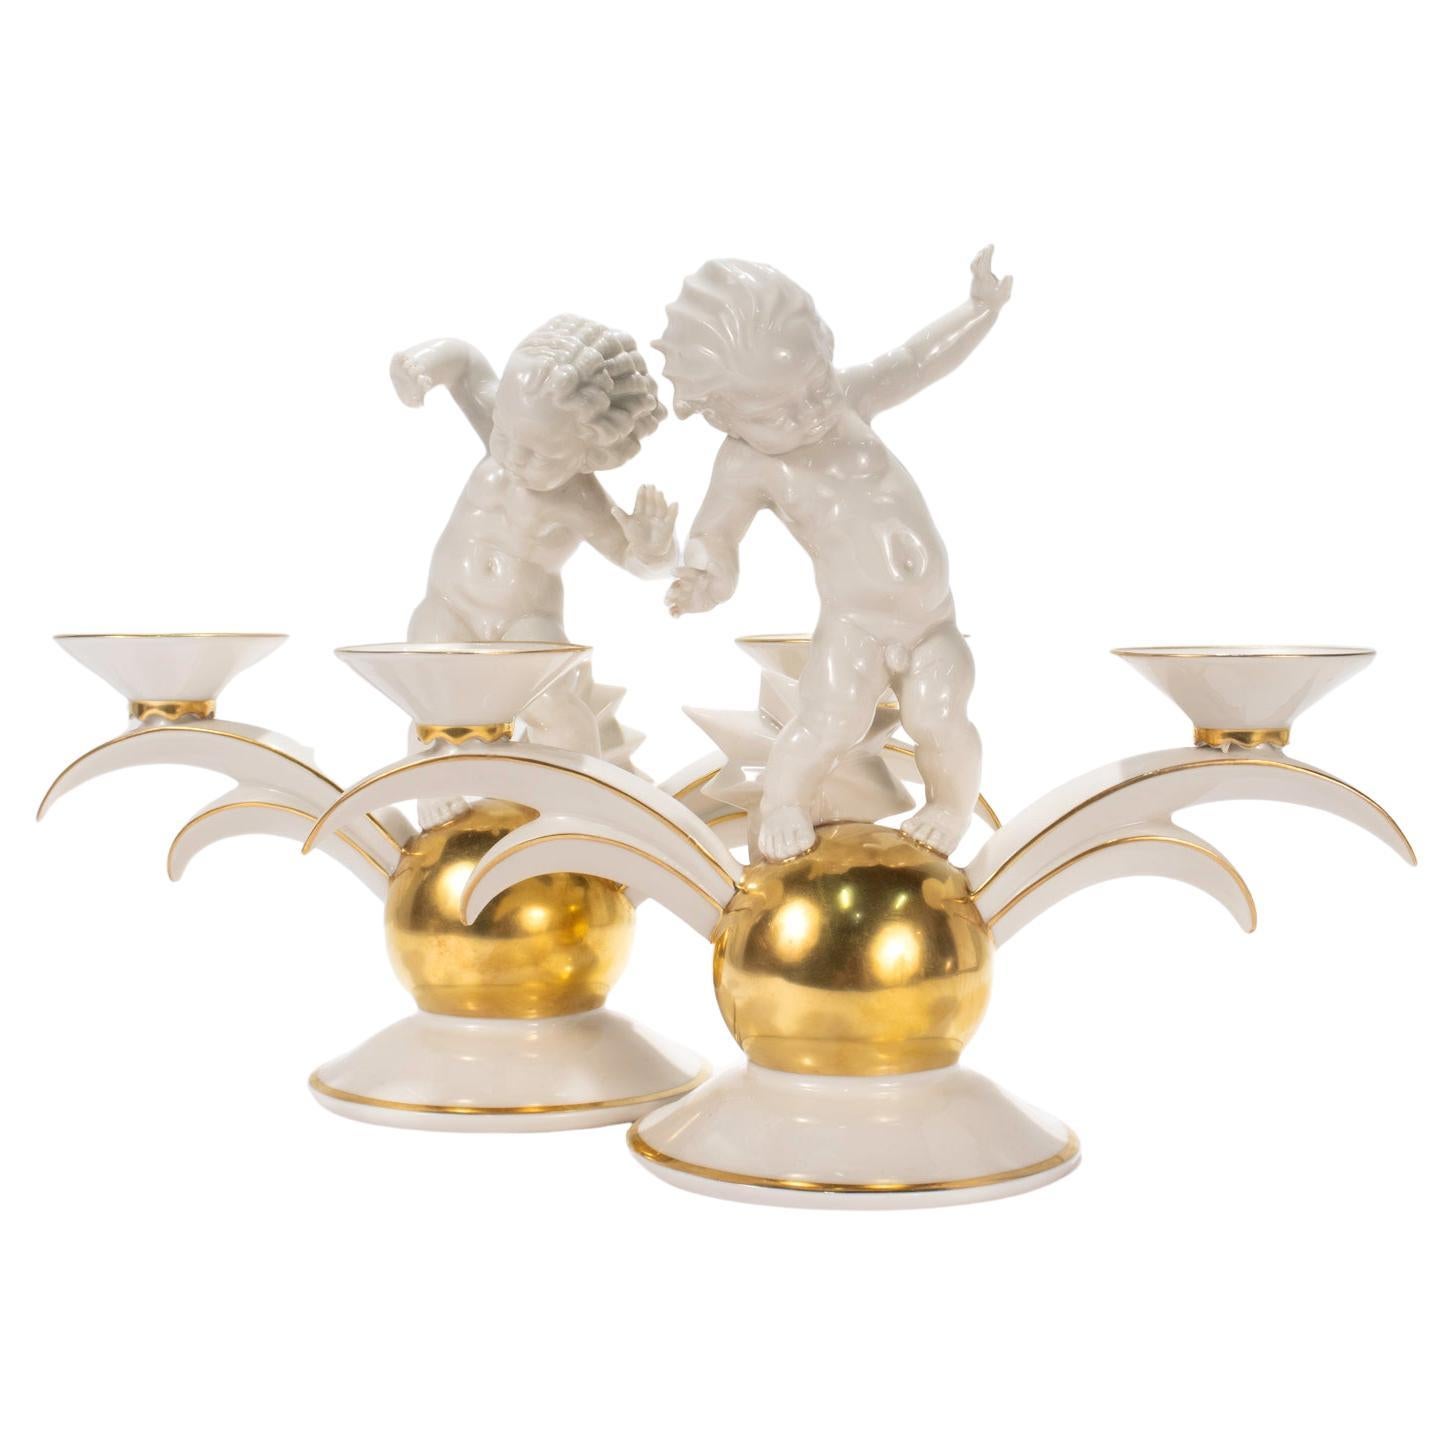 Pair of Hutschenreuther Art Deco Porcelain Candelabra by K. Tutter with Putti For Sale